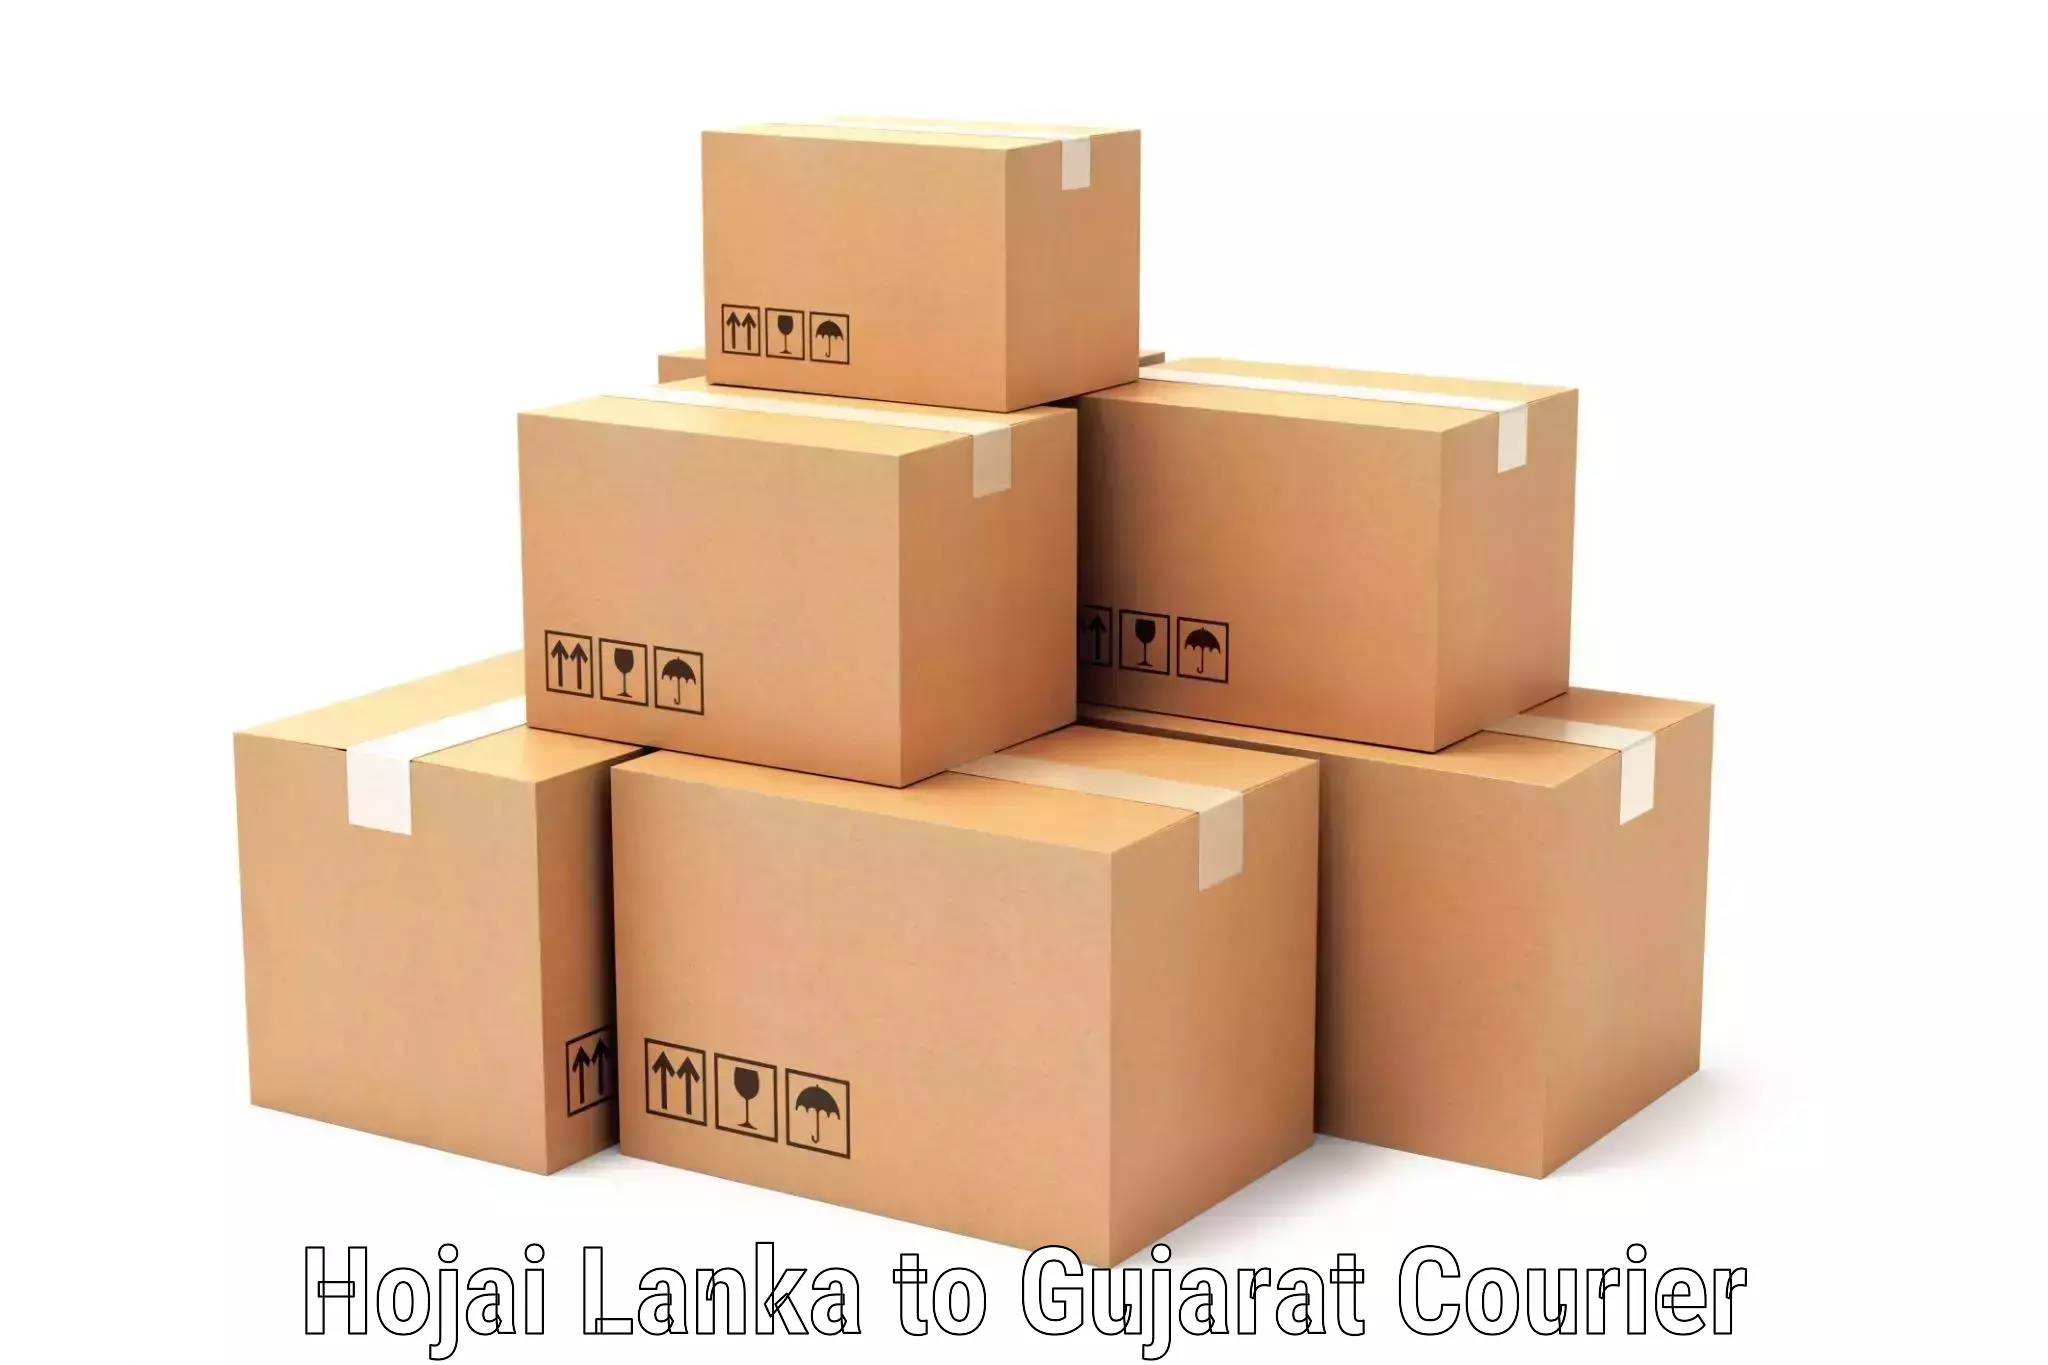 State-of-the-art courier technology Hojai Lanka to Patdi